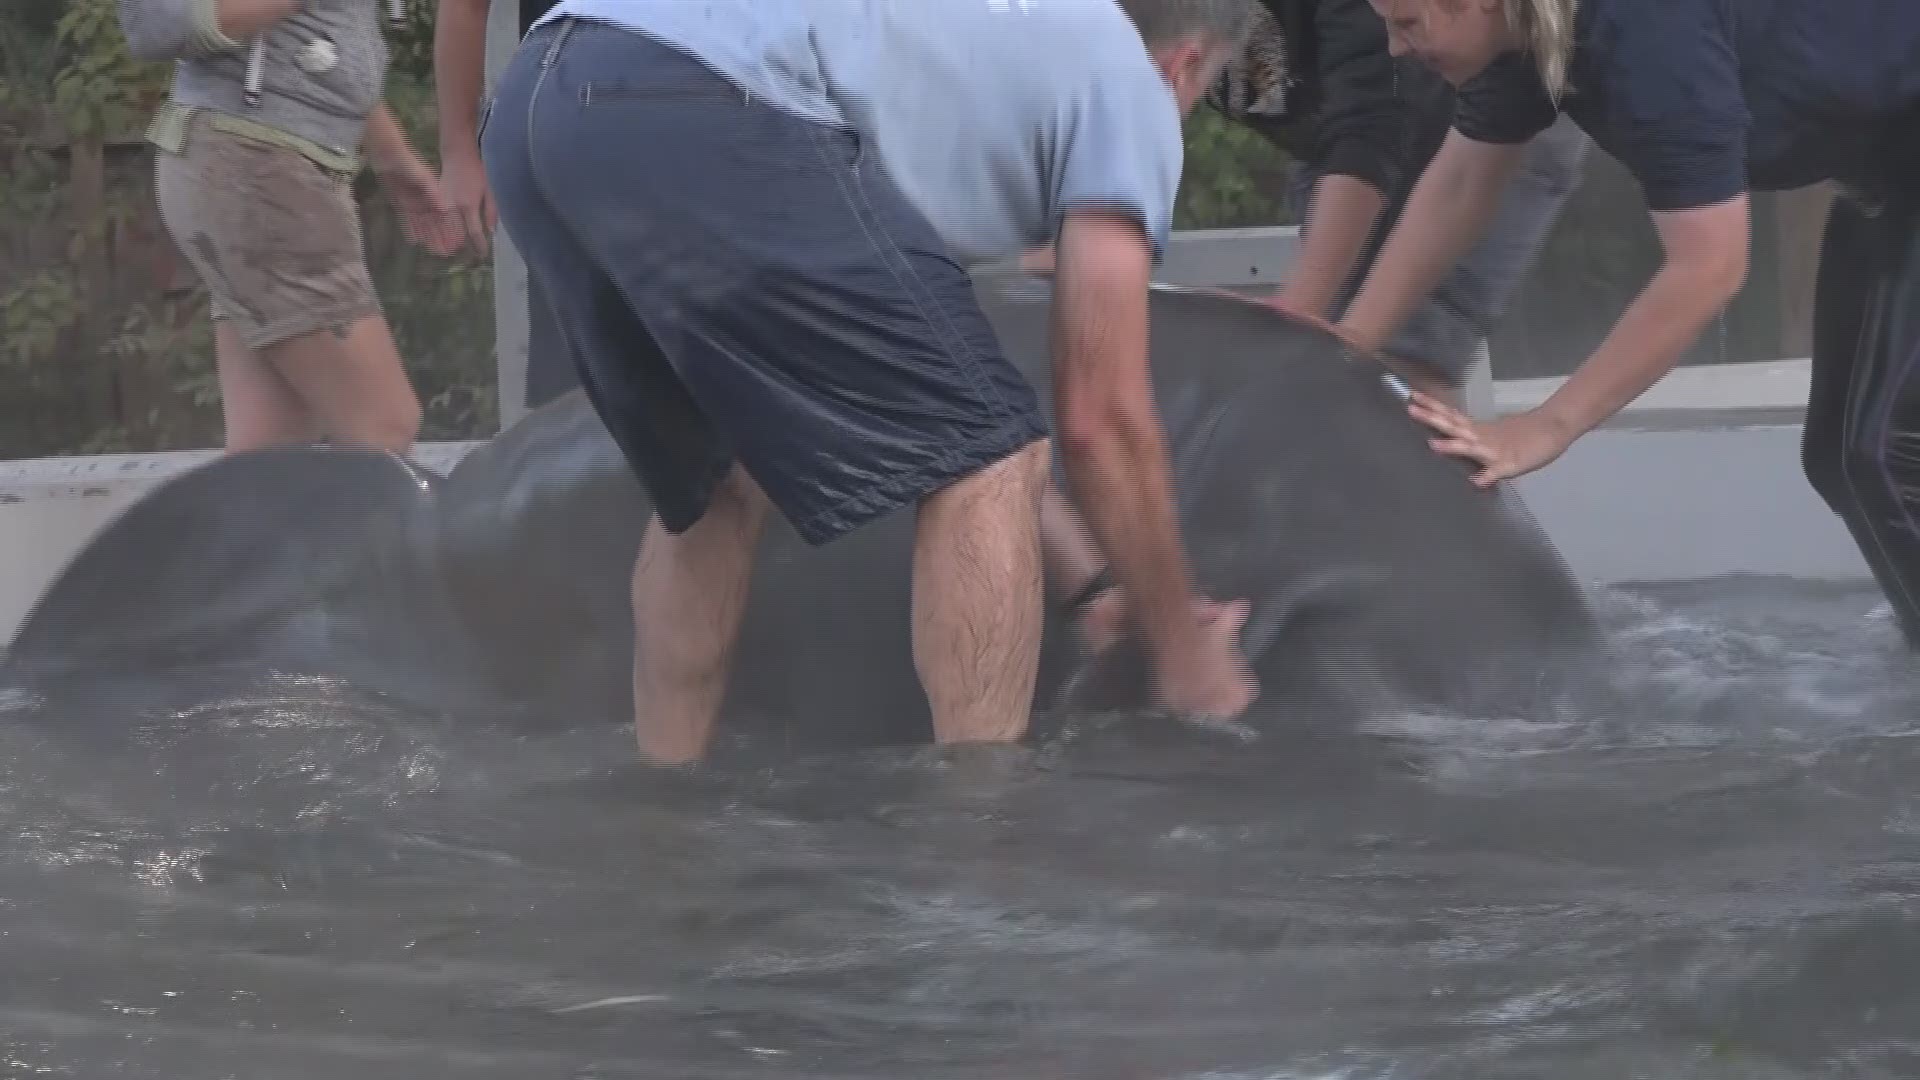 The manatee, named BriarRose, was expected to be released Thursday but that has been postponed due to an injury she sustained during transport.